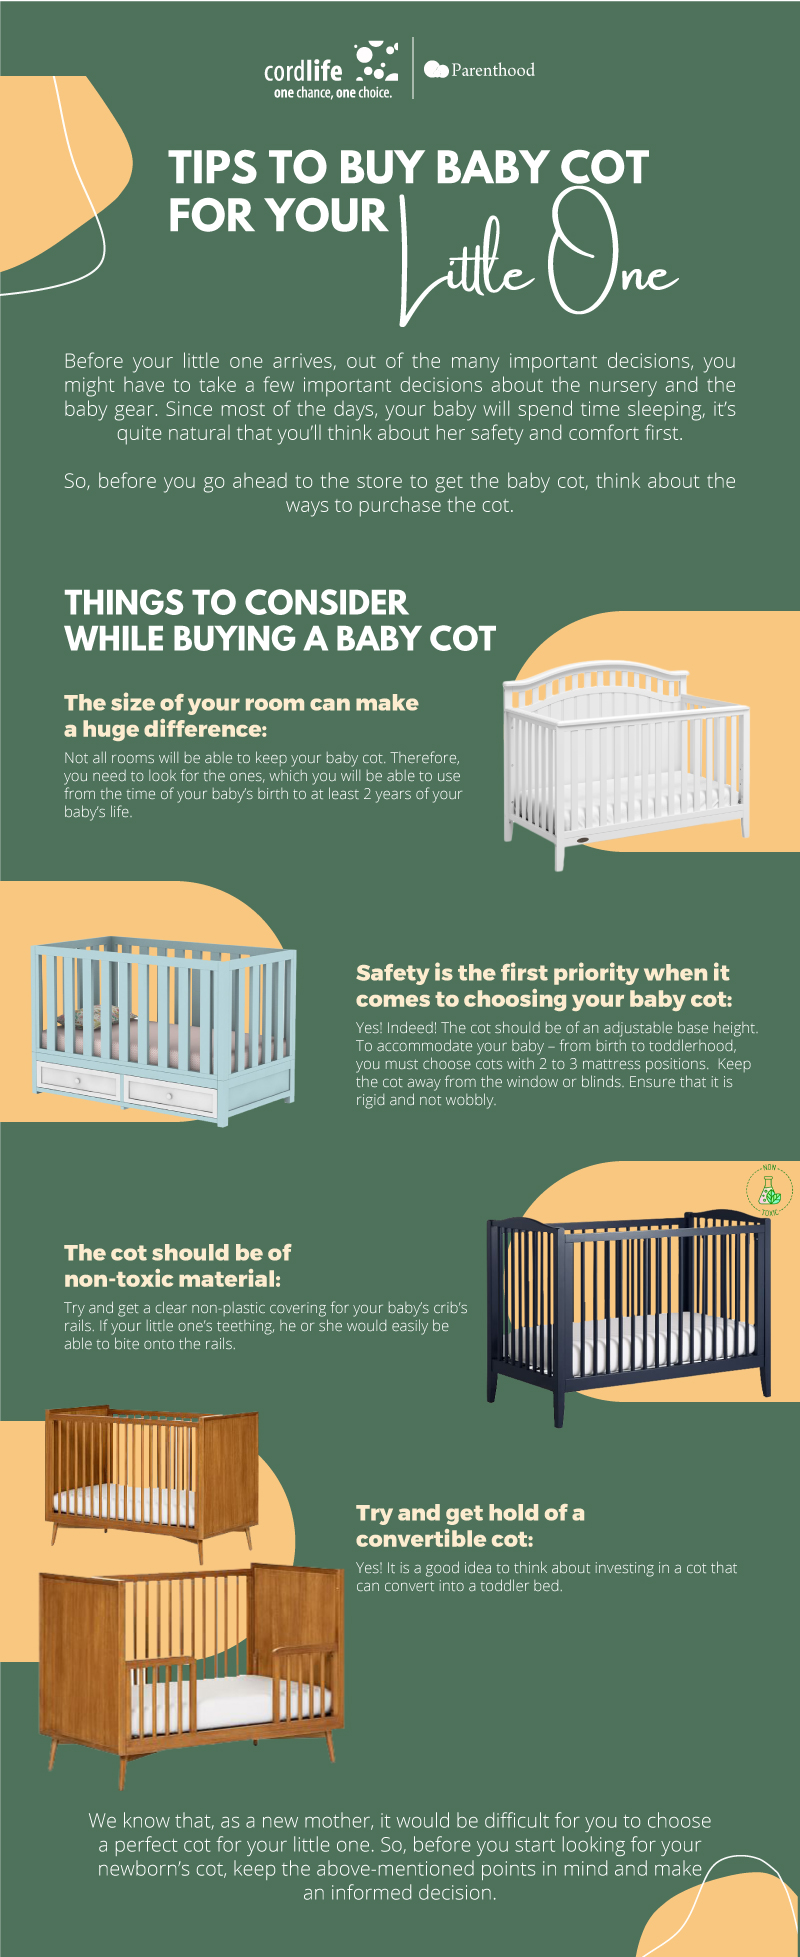 Tips to Buy Baby Cot for Your Little One